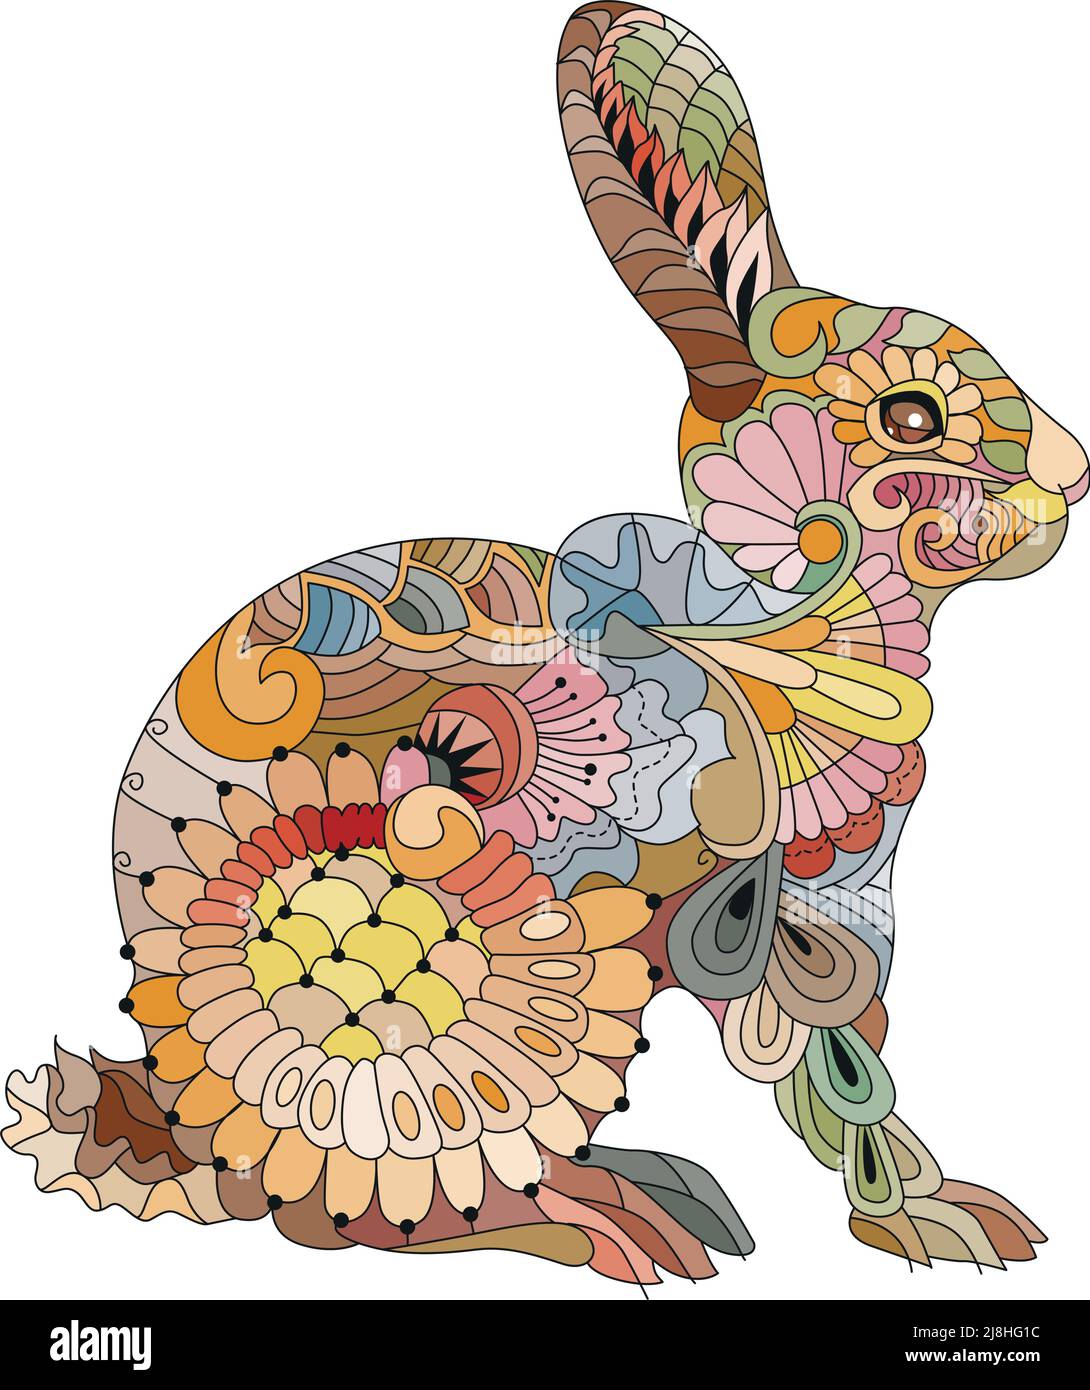 Spring rabbit. Easter background with creative cute bunny. Colorful vector illustration. Stock Vector